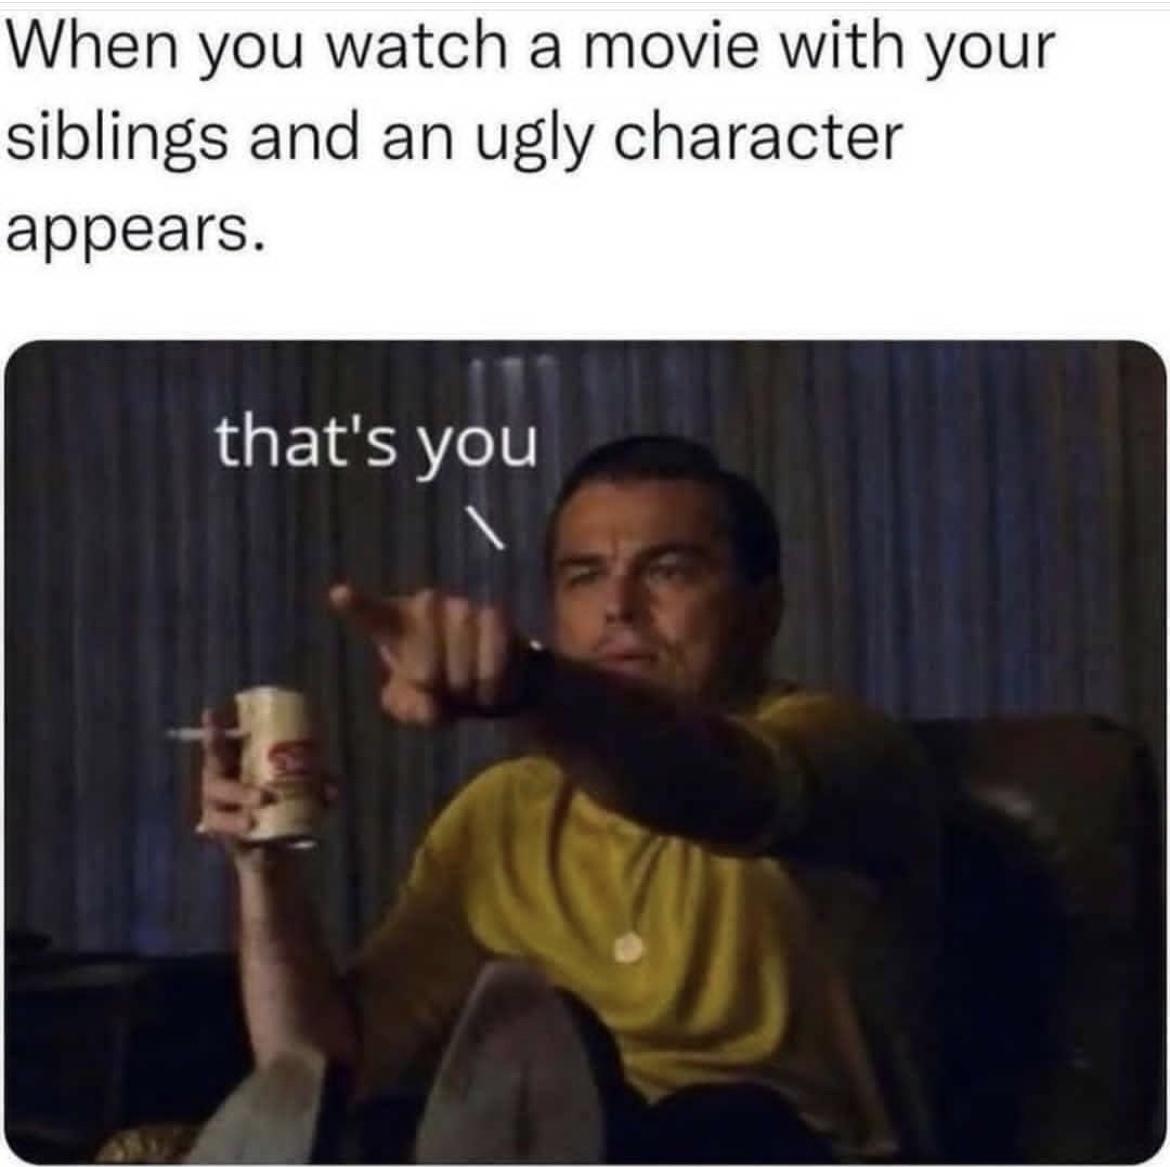 Childhood Memes - origin of memes - When you watch a movie with your siblings and an ugly character appears. that's you